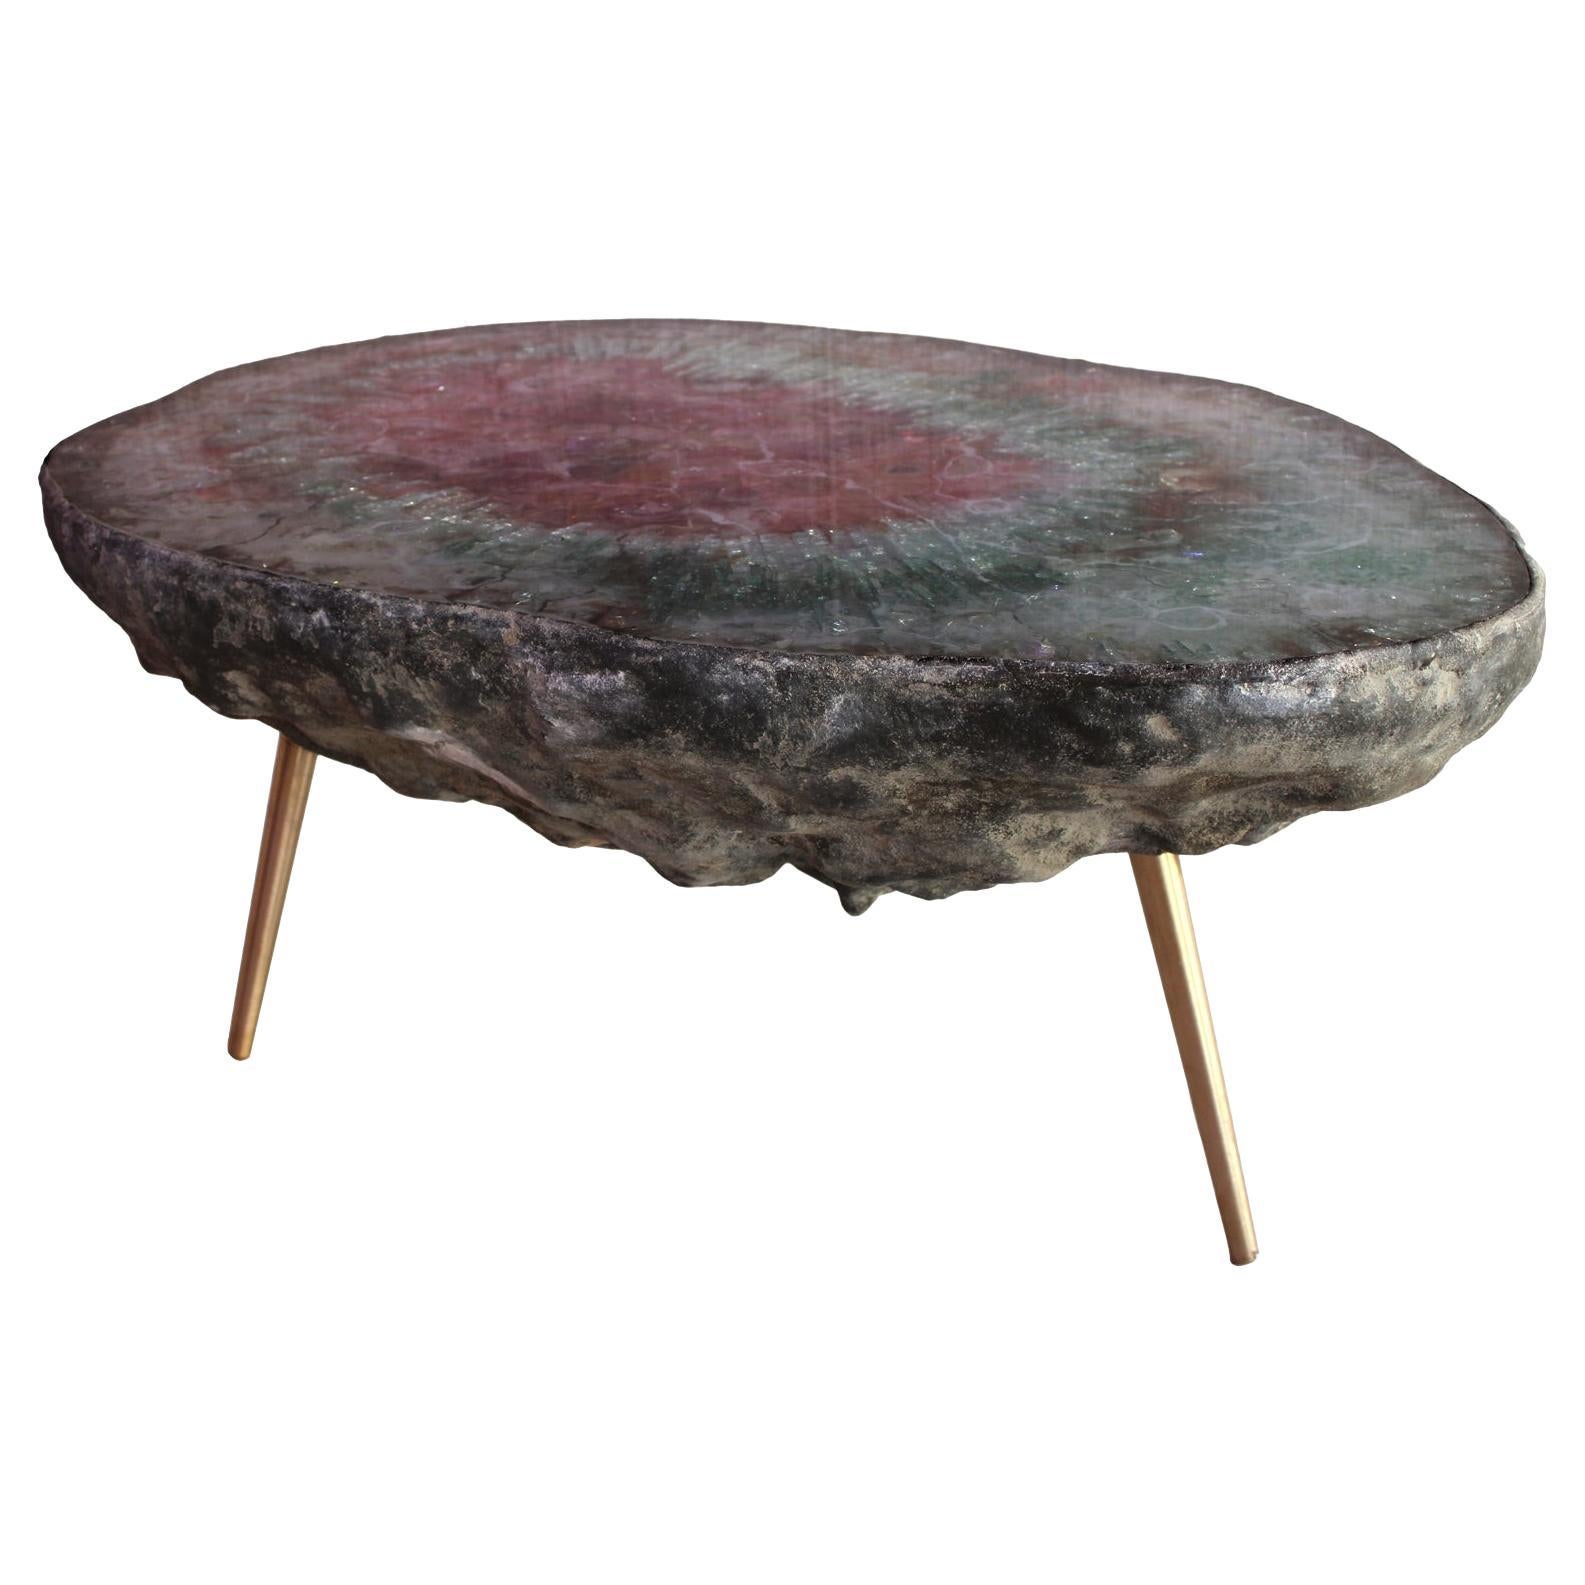 Arty Coffee Table by Von Pelt Atelier Handmade with Rare Geode Shape